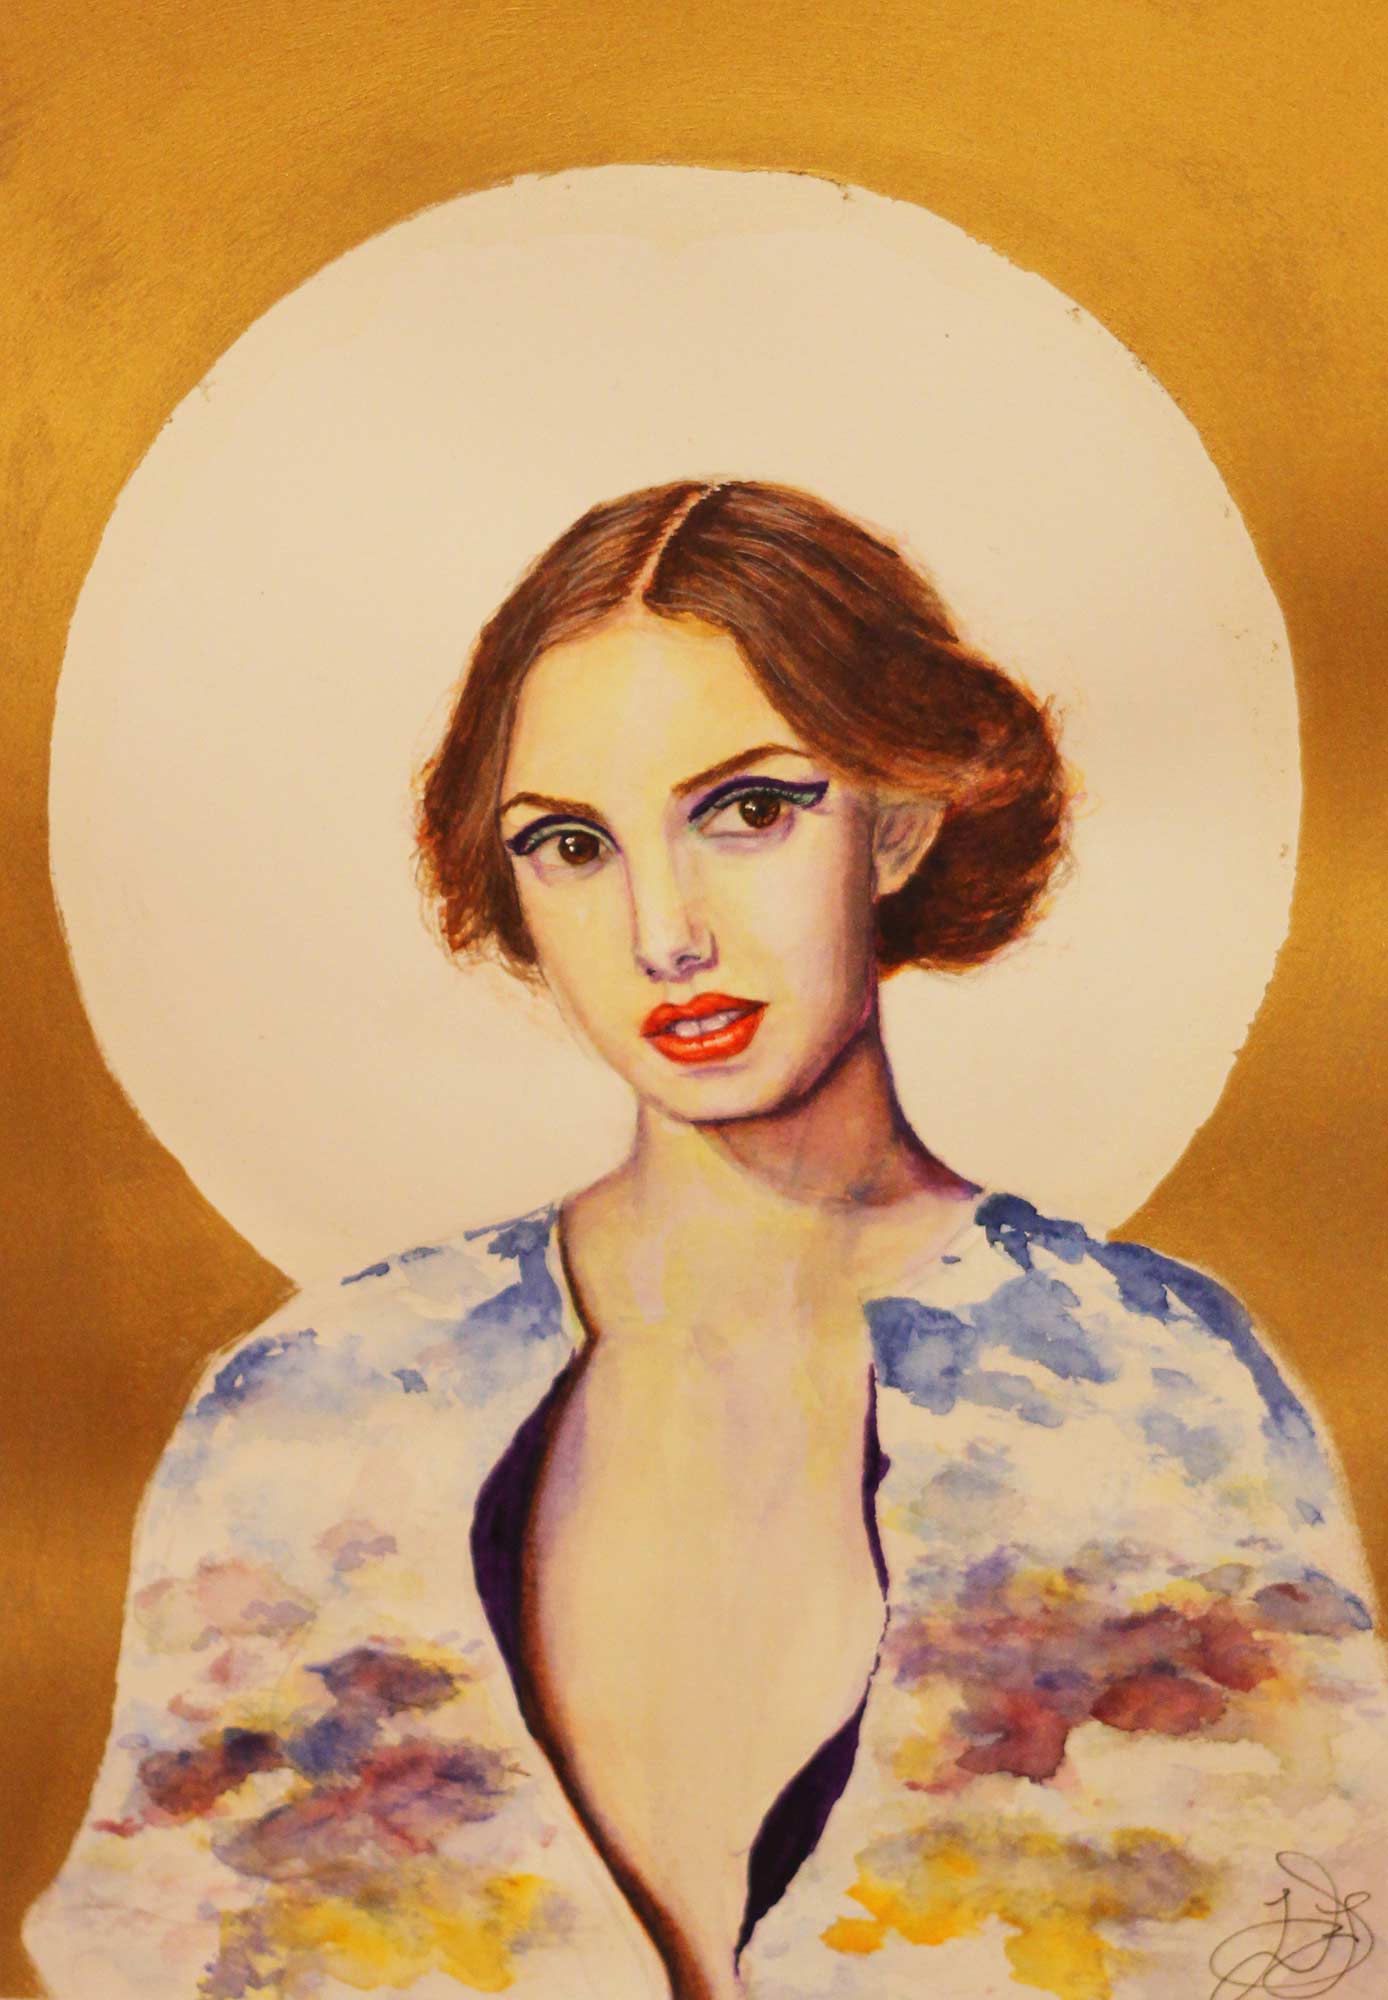 A painted portrait of a woman in front of a white orb